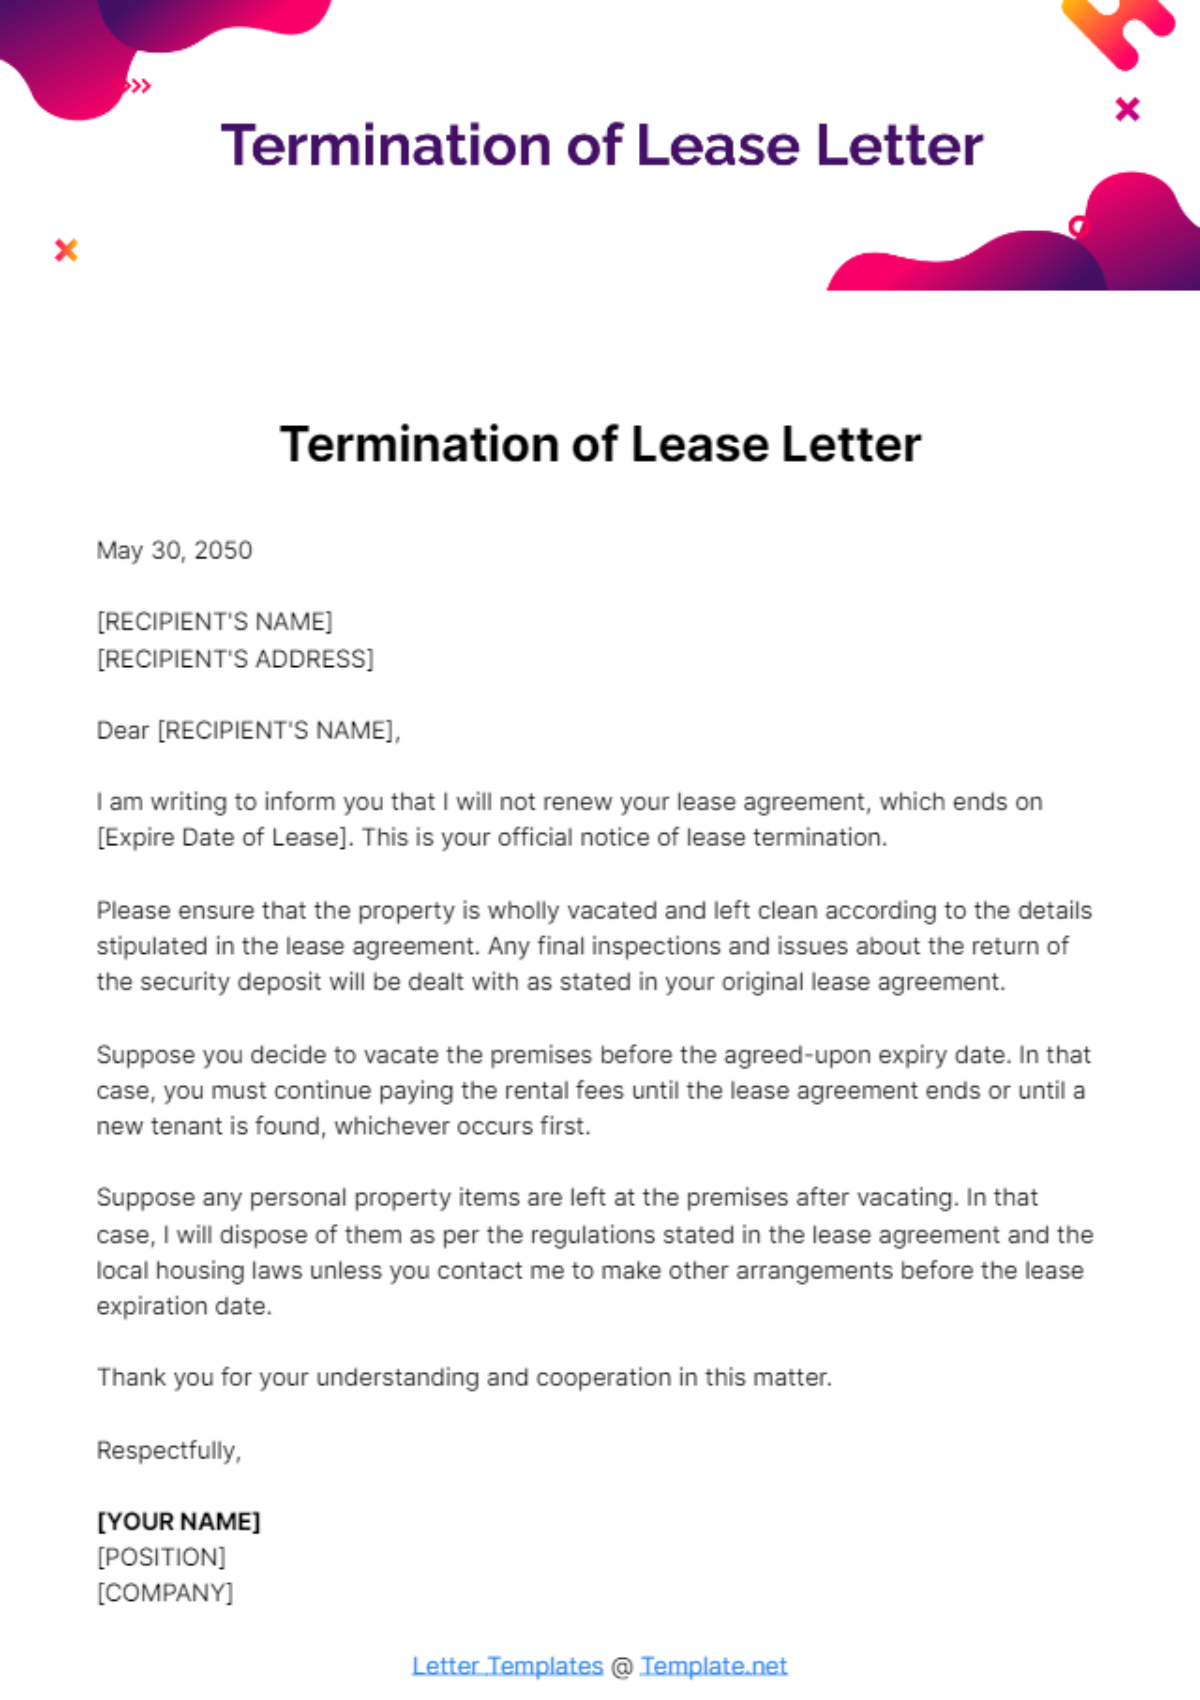 Free Termination of Lease Letter Template